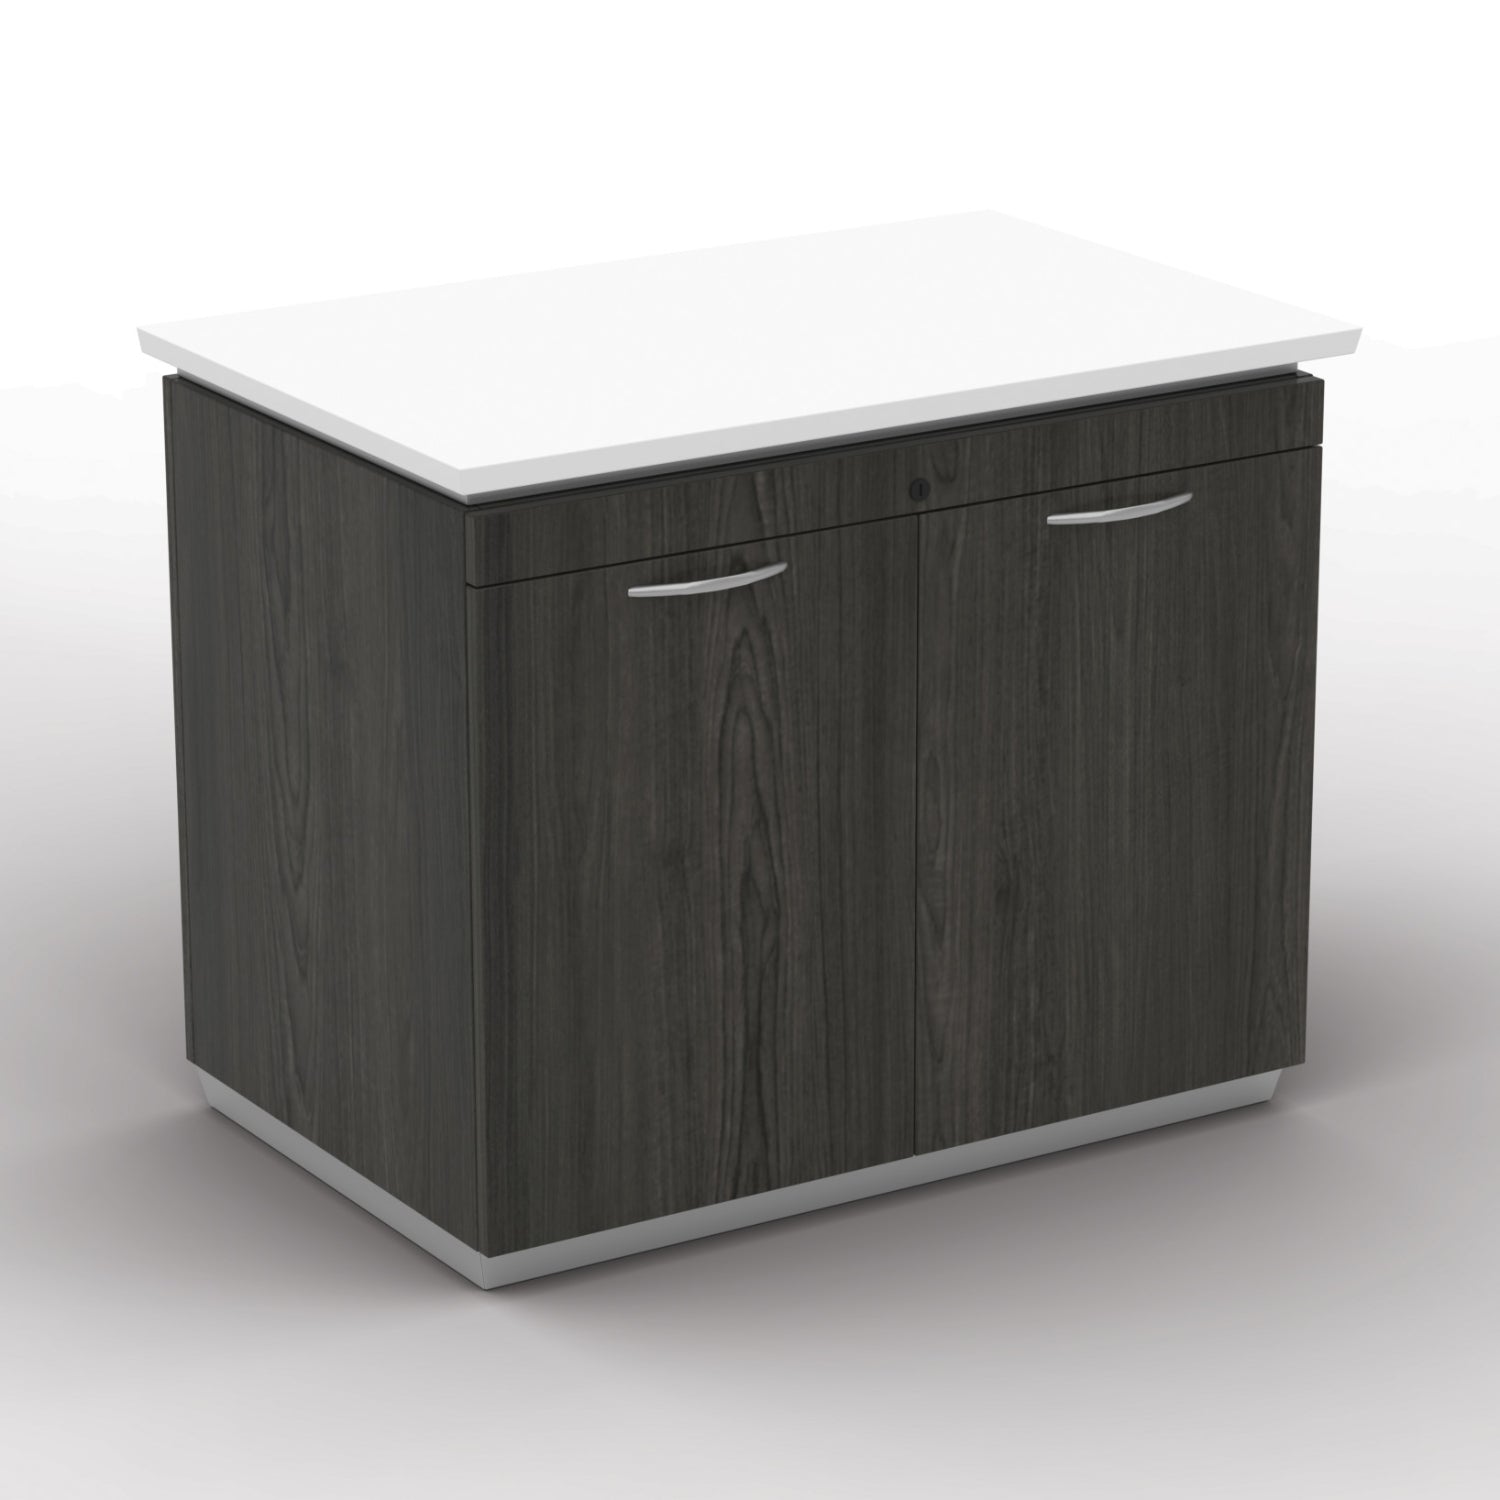 "Tuxedo White" 2-Door Storage Cabinet, 36" W x 24" D x 30" H, White Top with Slate Grey Base